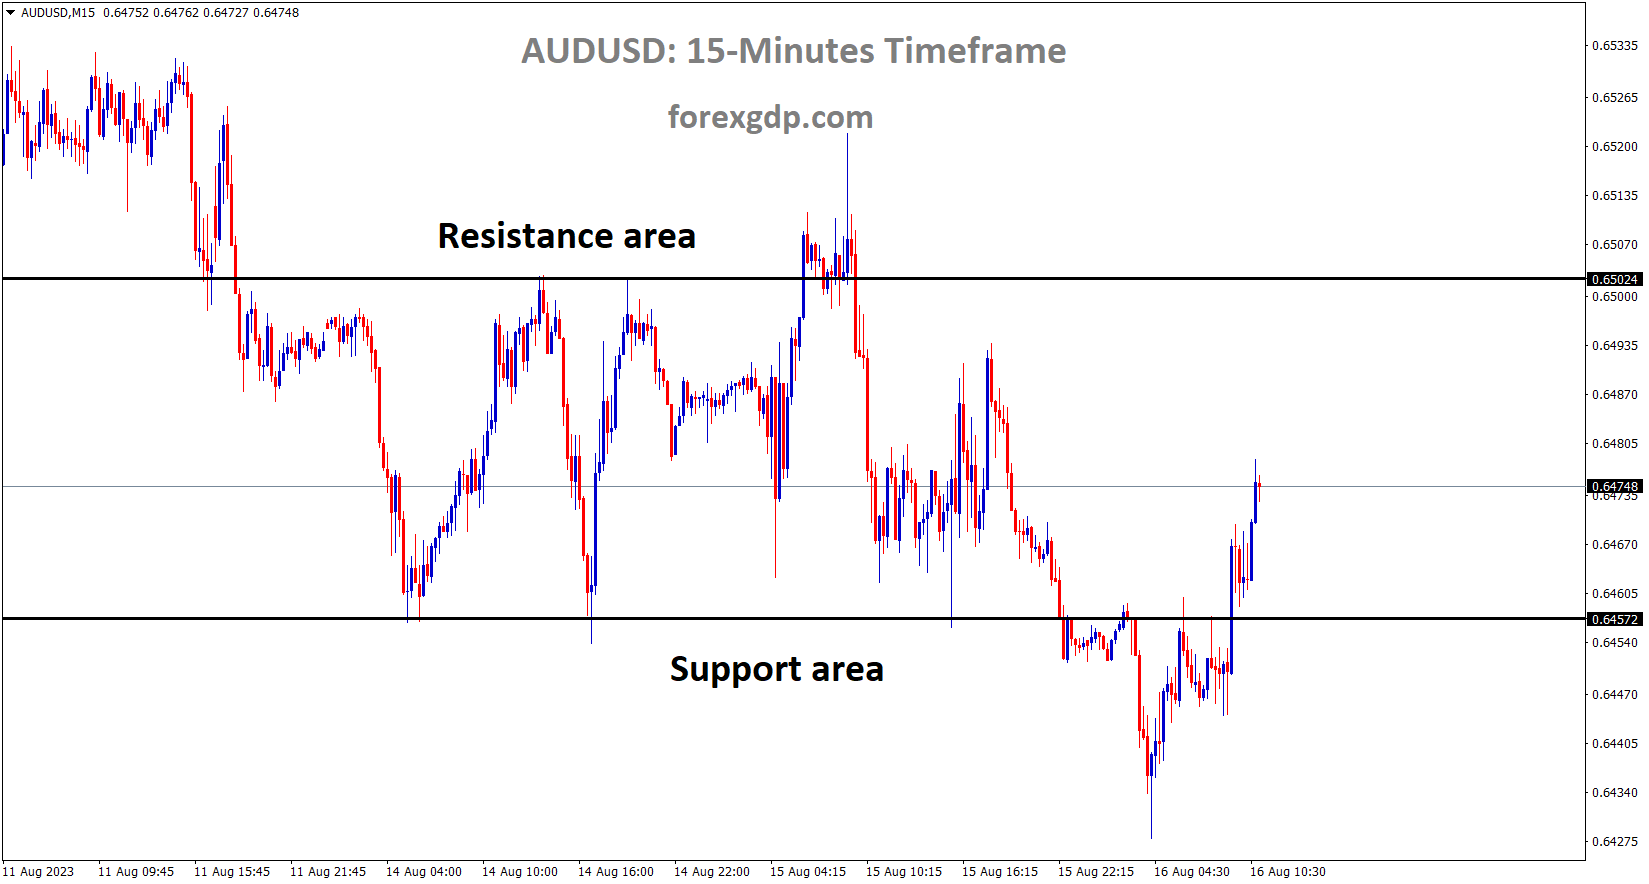 AUDUSD is moving in the Box pattern and the market has rebounded from the Horizontal Support area of the pattern